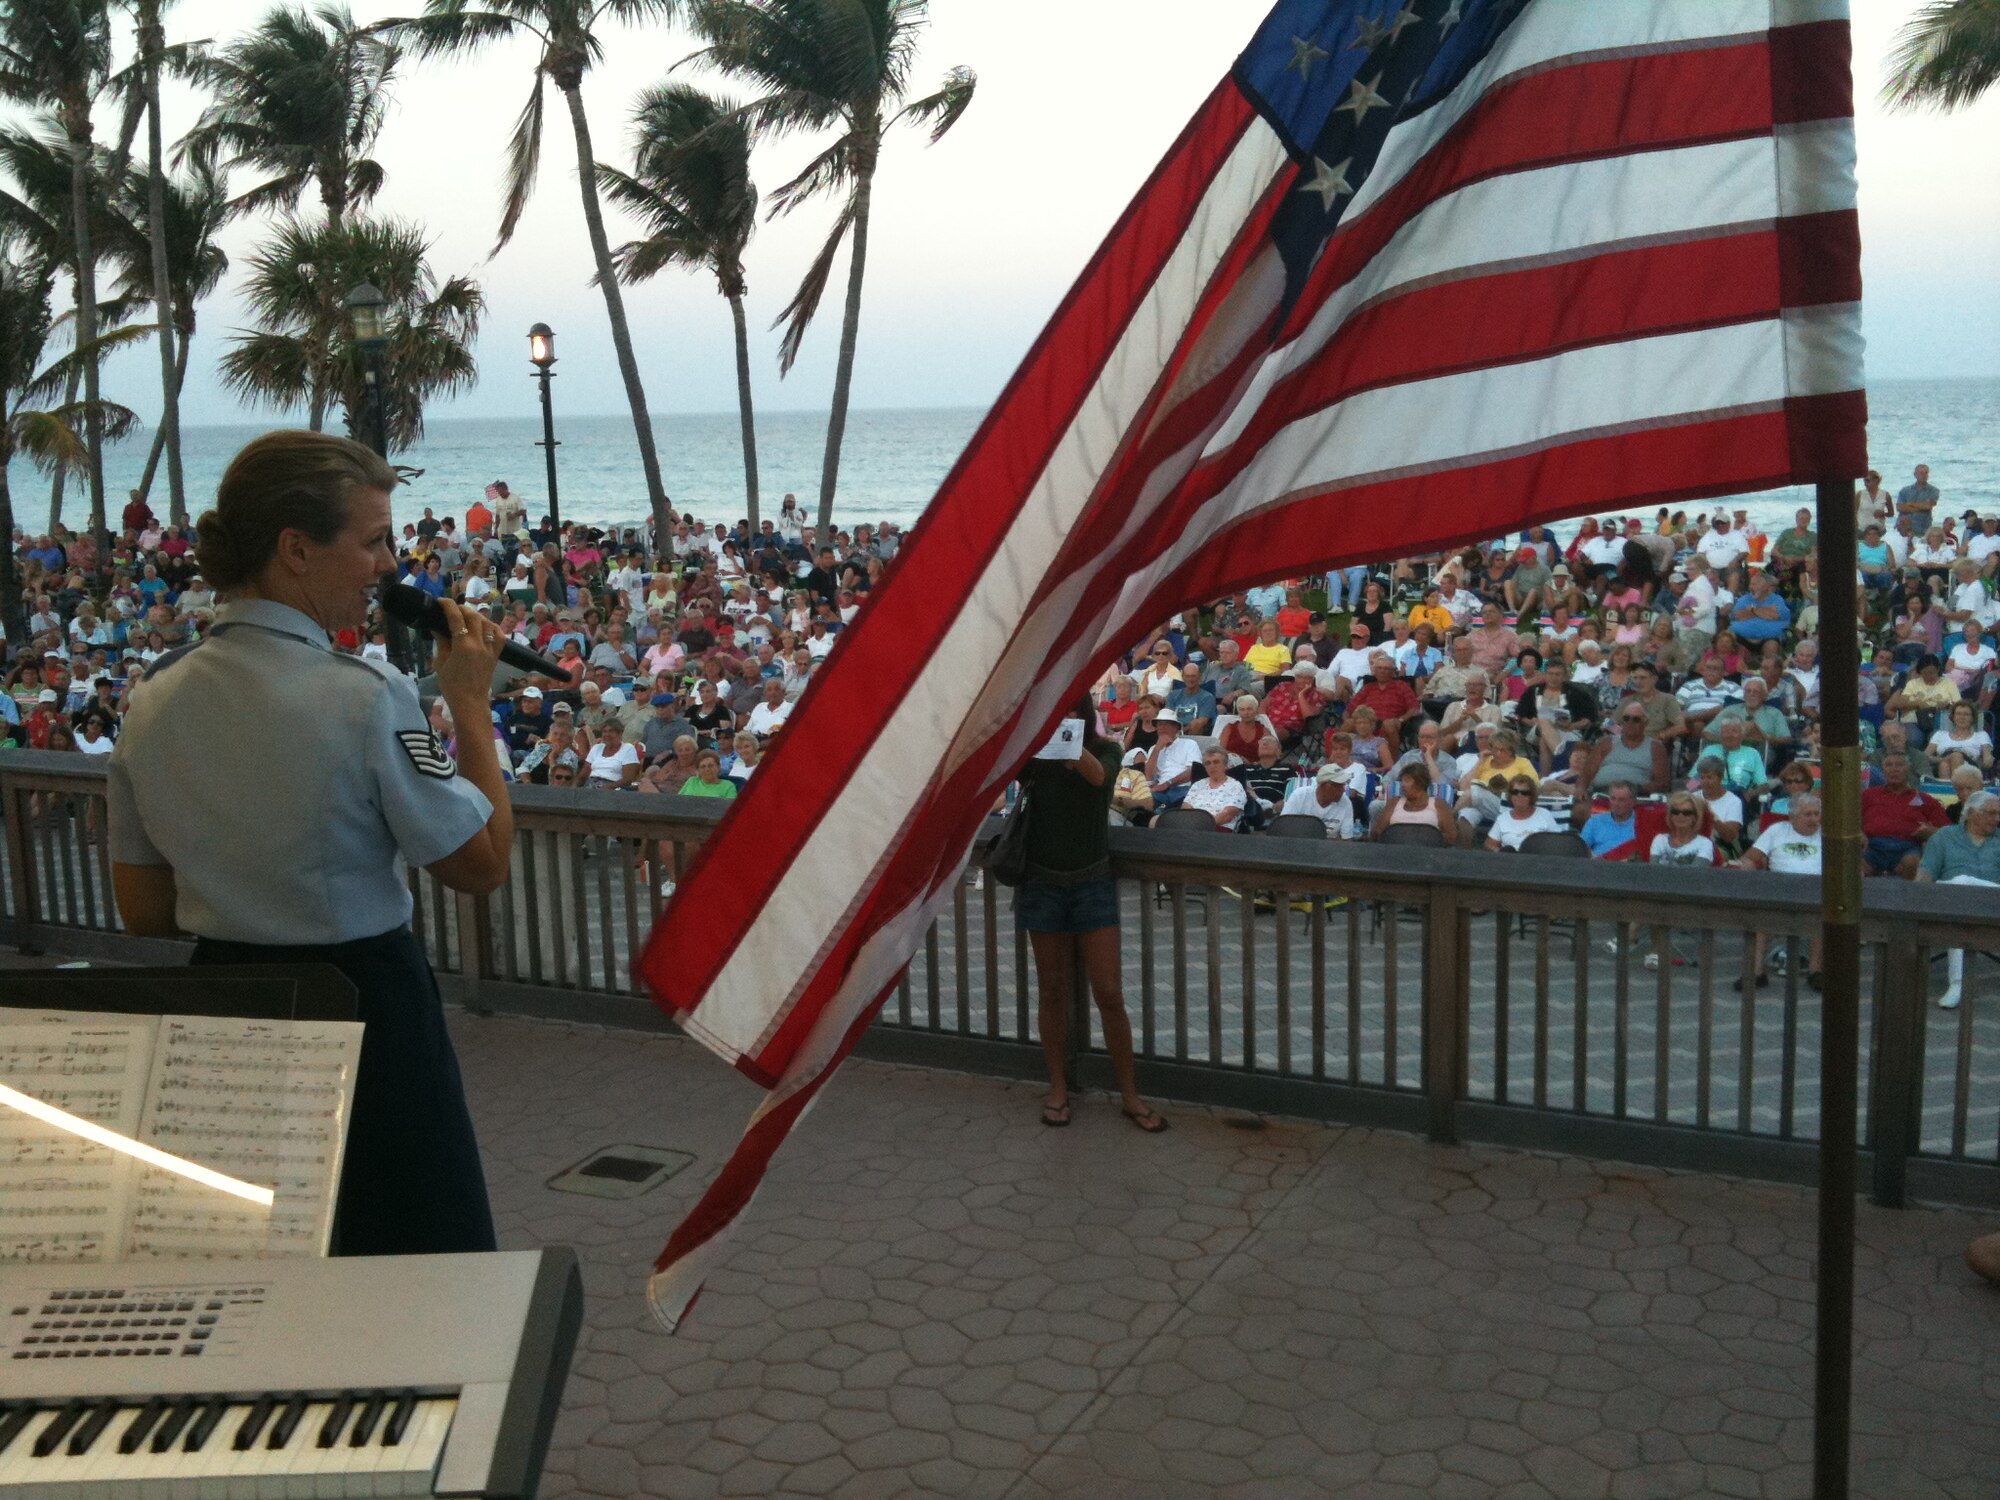 Technical Sergeant Krista Joyce of the United
States Air Force Academy Band's Falconaires, Deerfield Beach, Florida.
